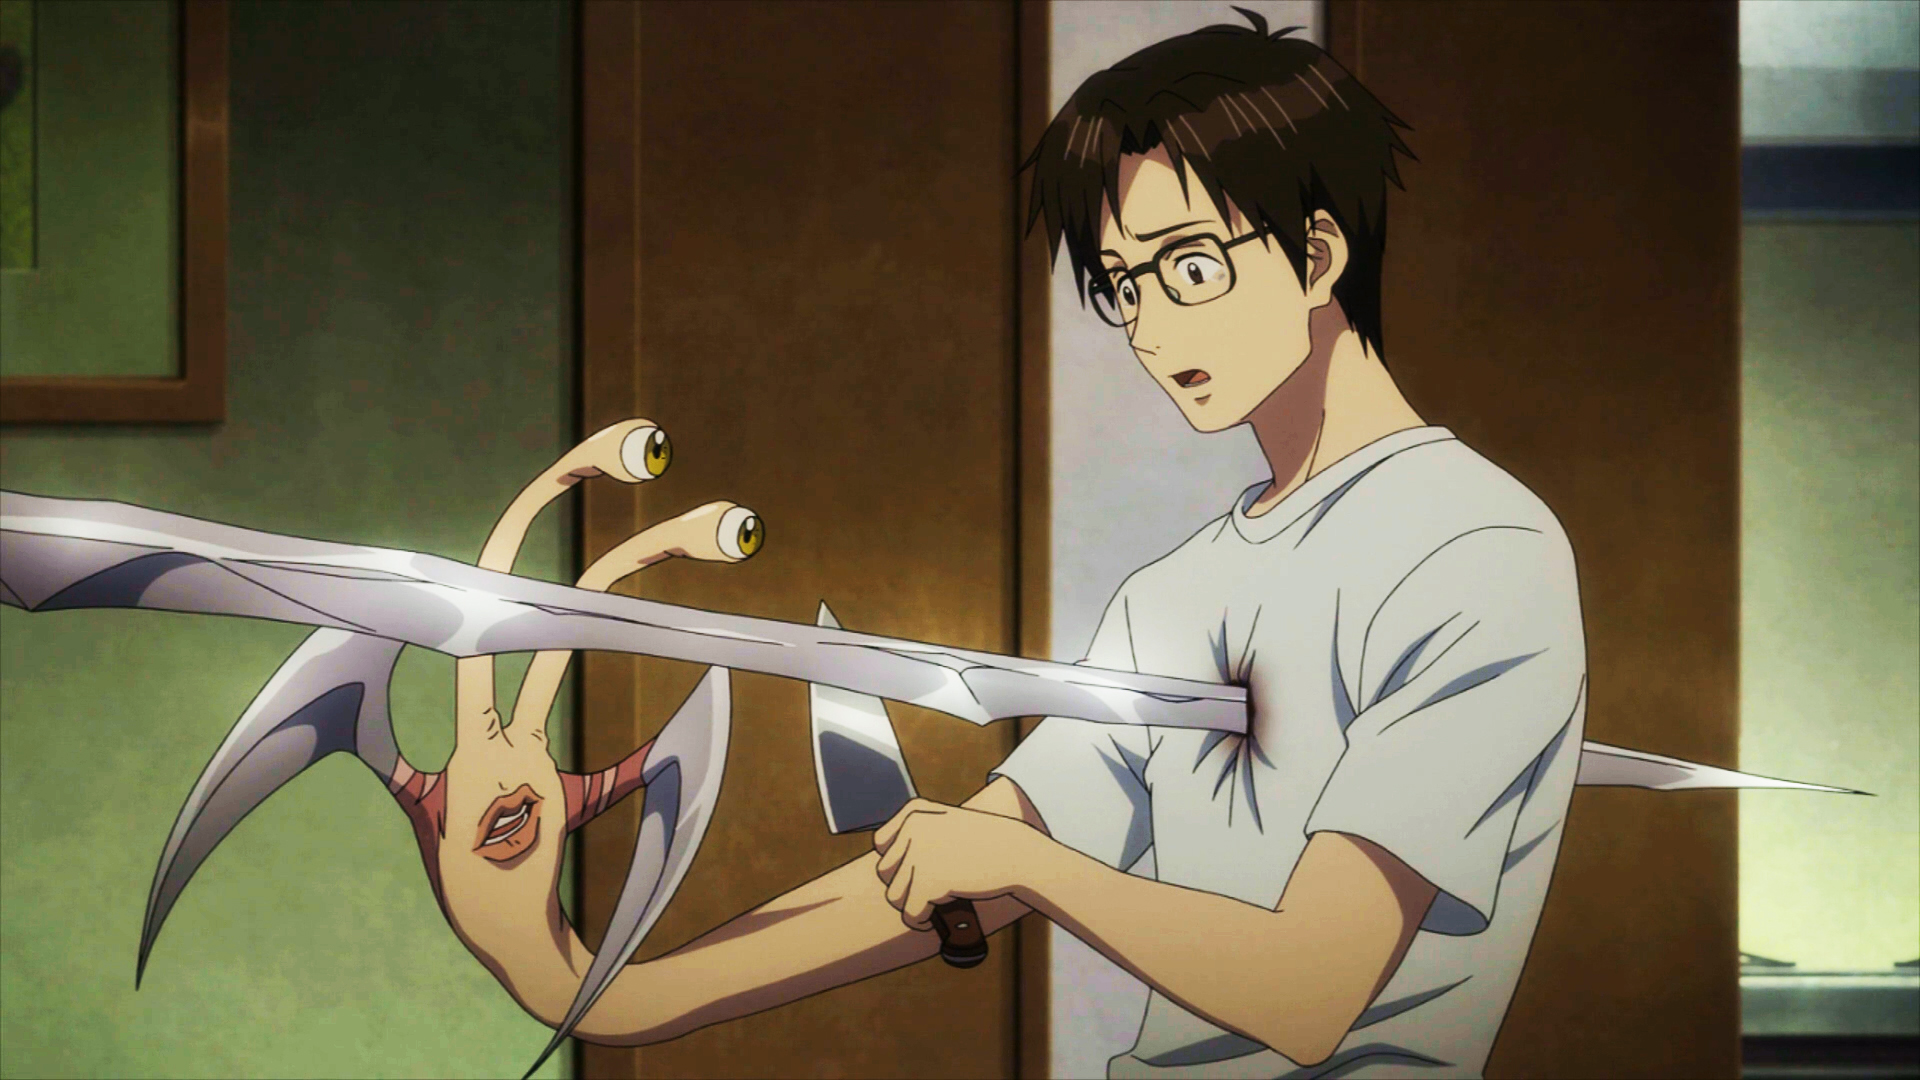 Shinich getting stabbed (Parasyte